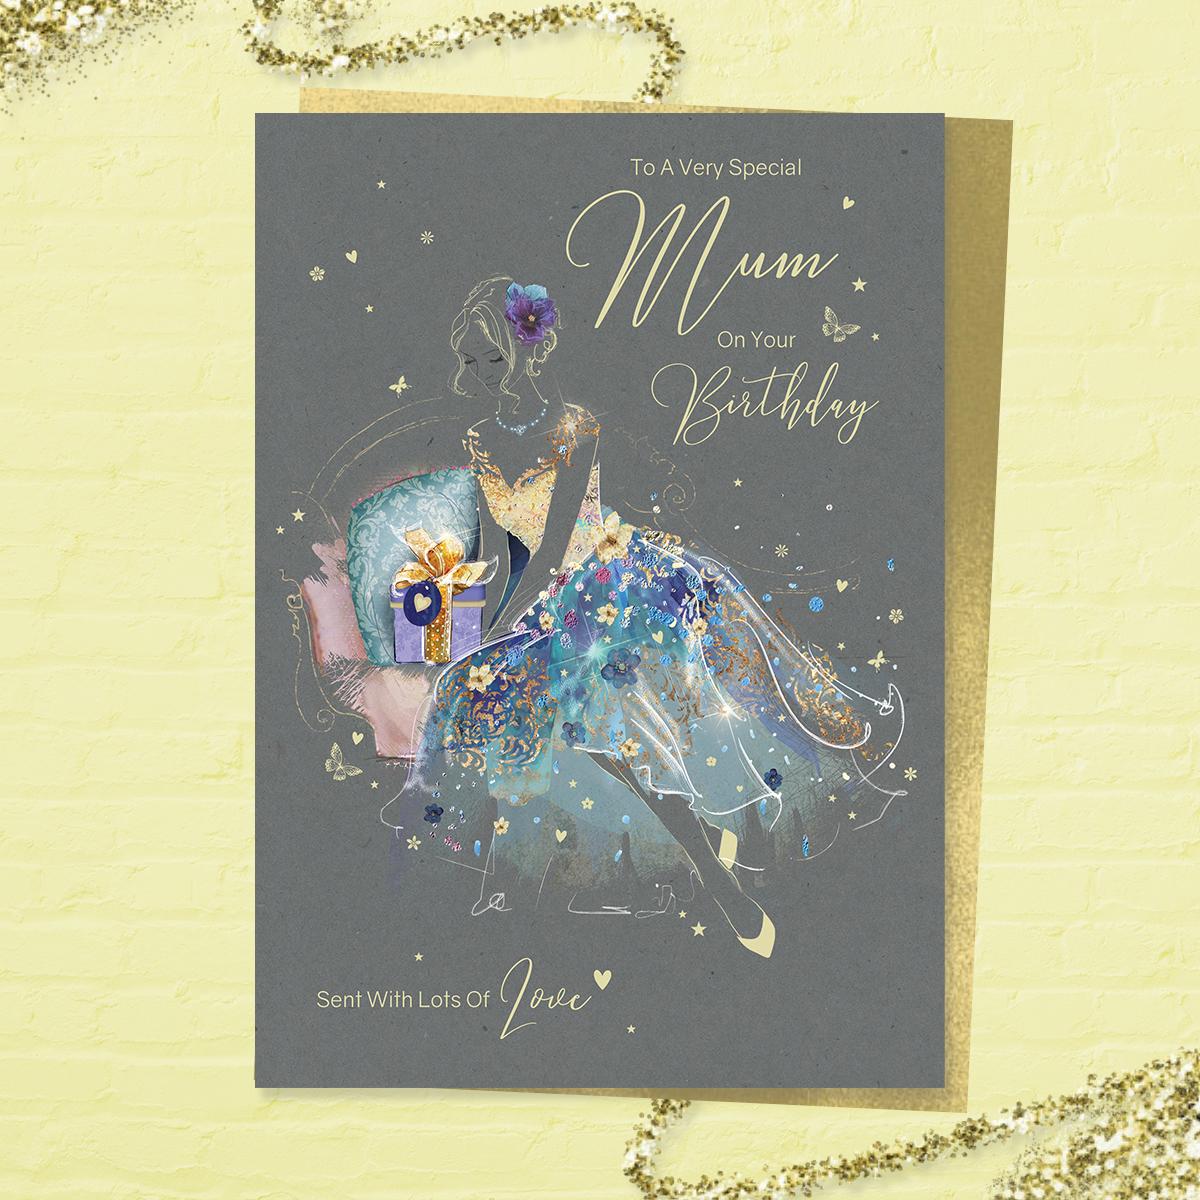 Just For You Mum On Your Birthday' larger card from the 'Grace' range. Beautiful Lady in A Blue And Gold Dress. Added Sparkle And Gold Foil Detail. Printed Insert With Colour Image And Heartfelt Verse. Complete With Gold Colour Envelope